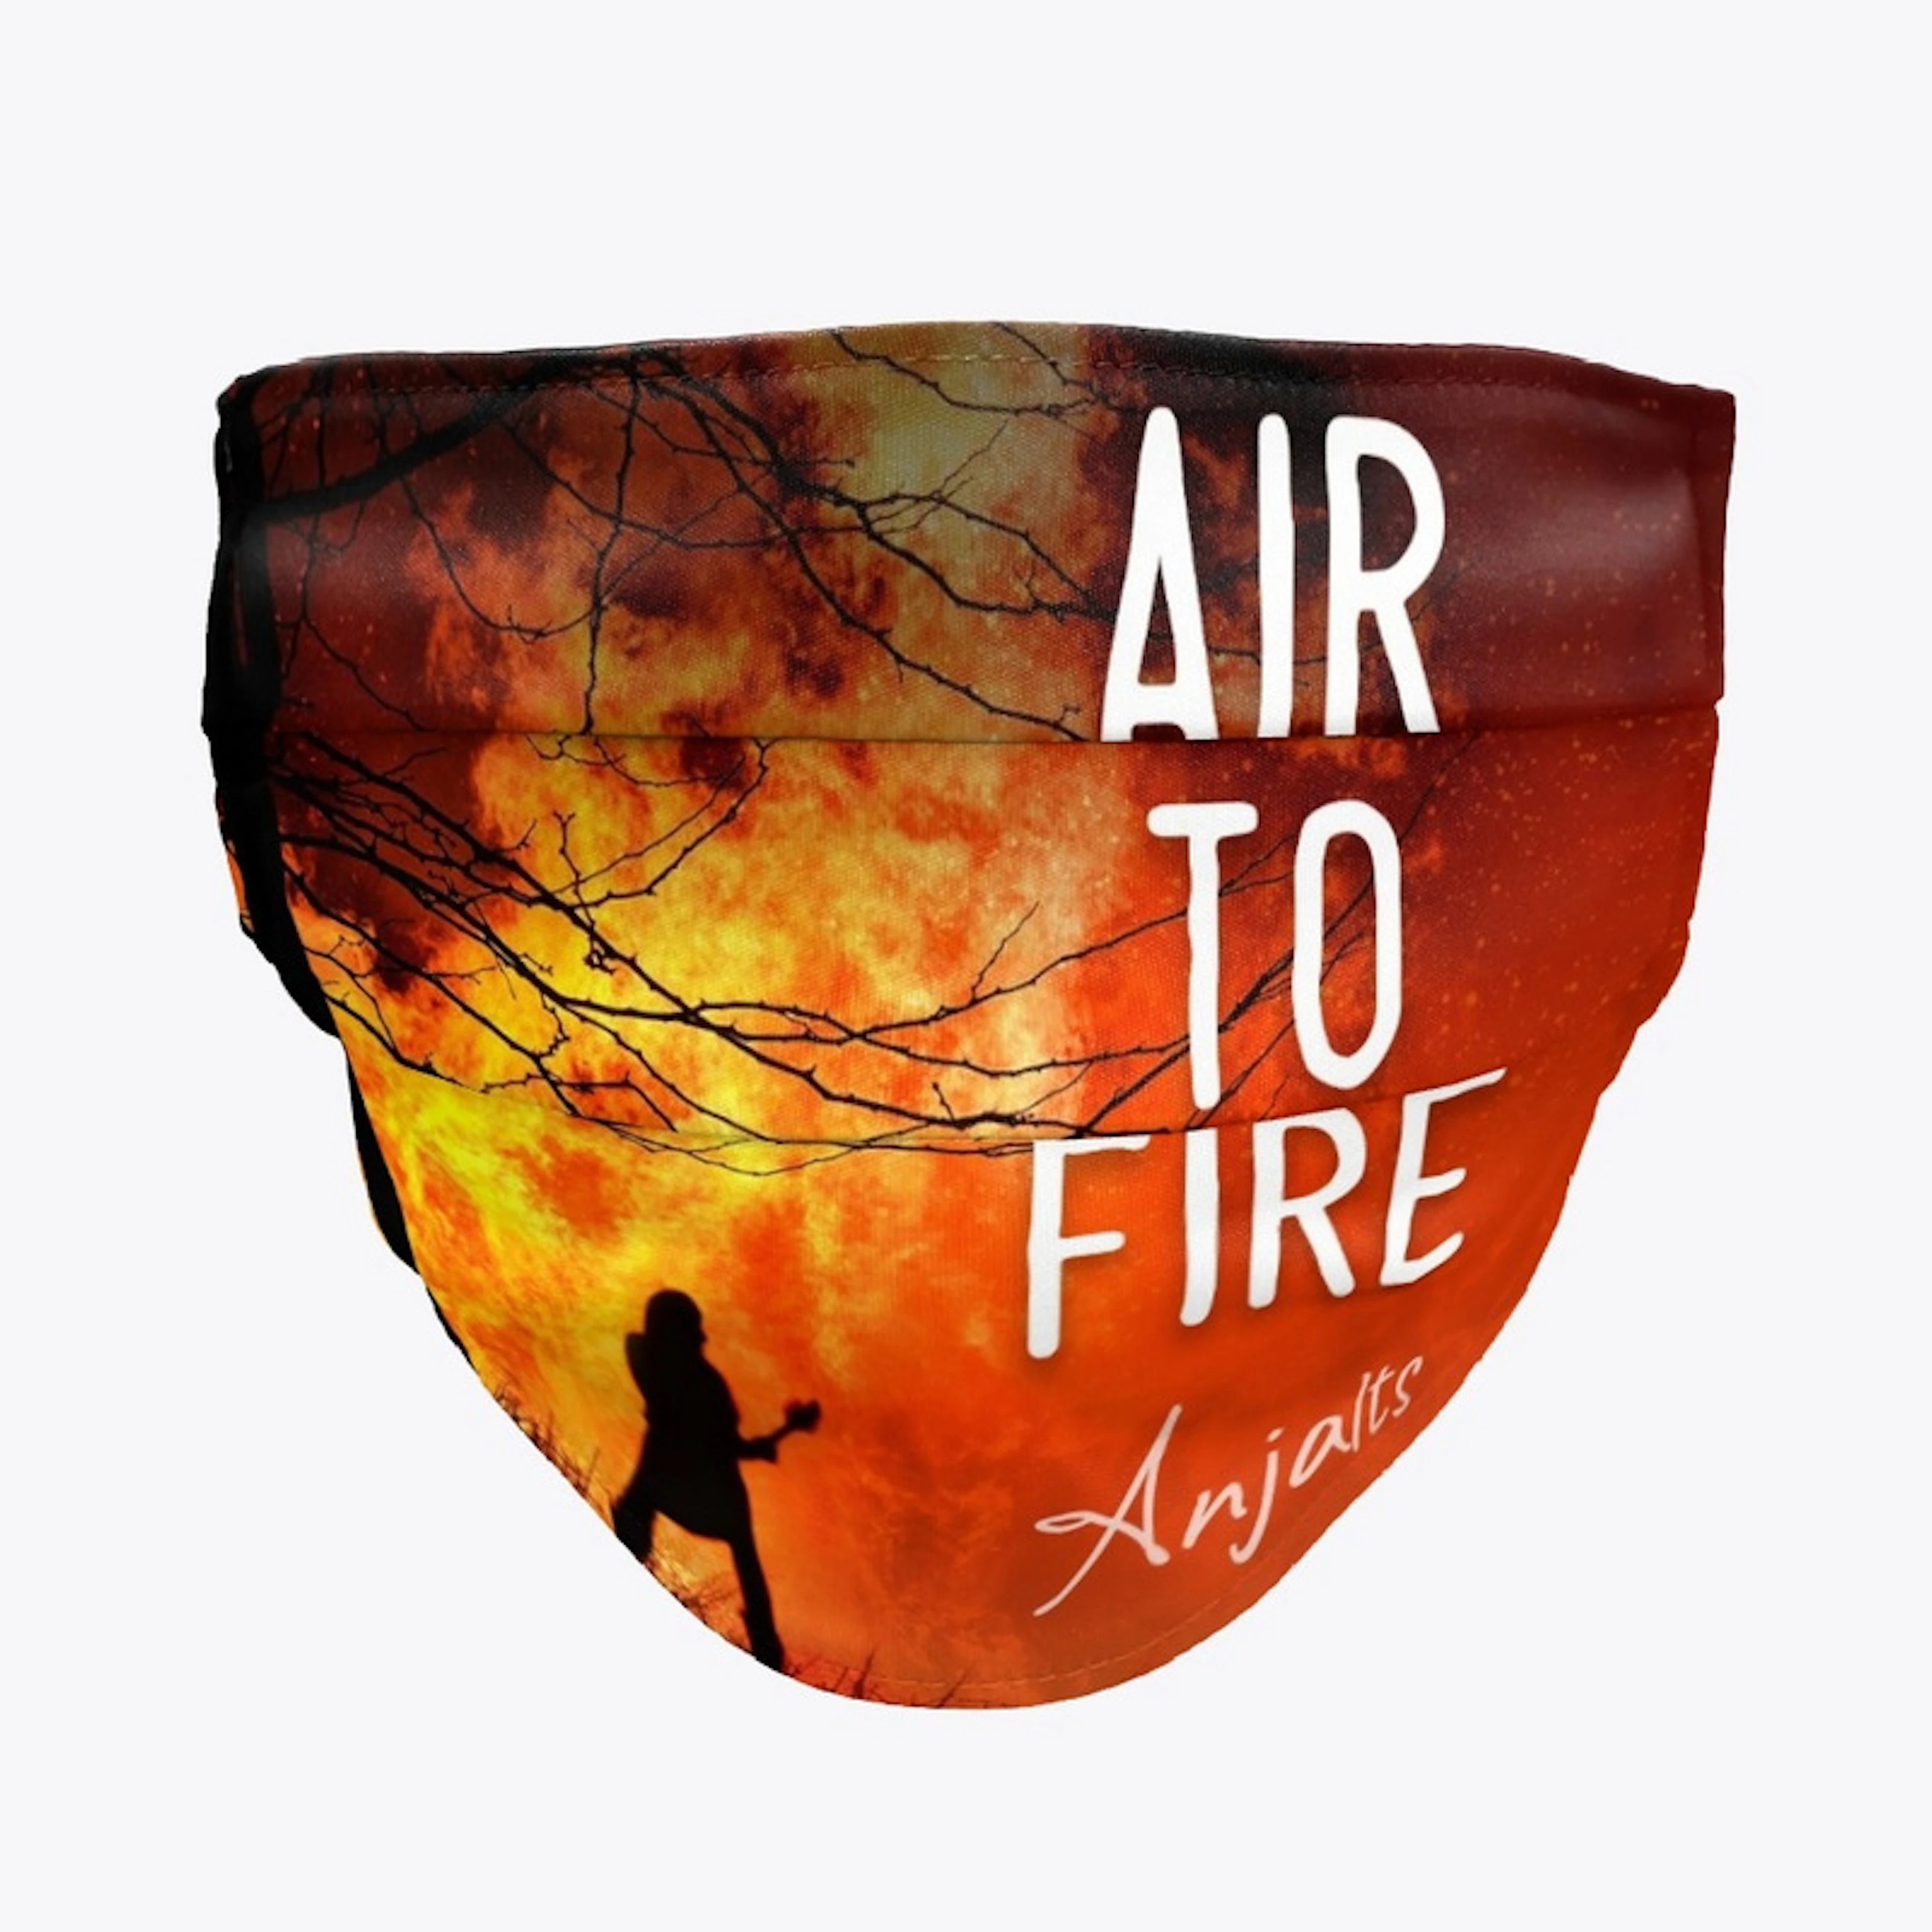 Anjalts "Air To Fire" Cloth Mask